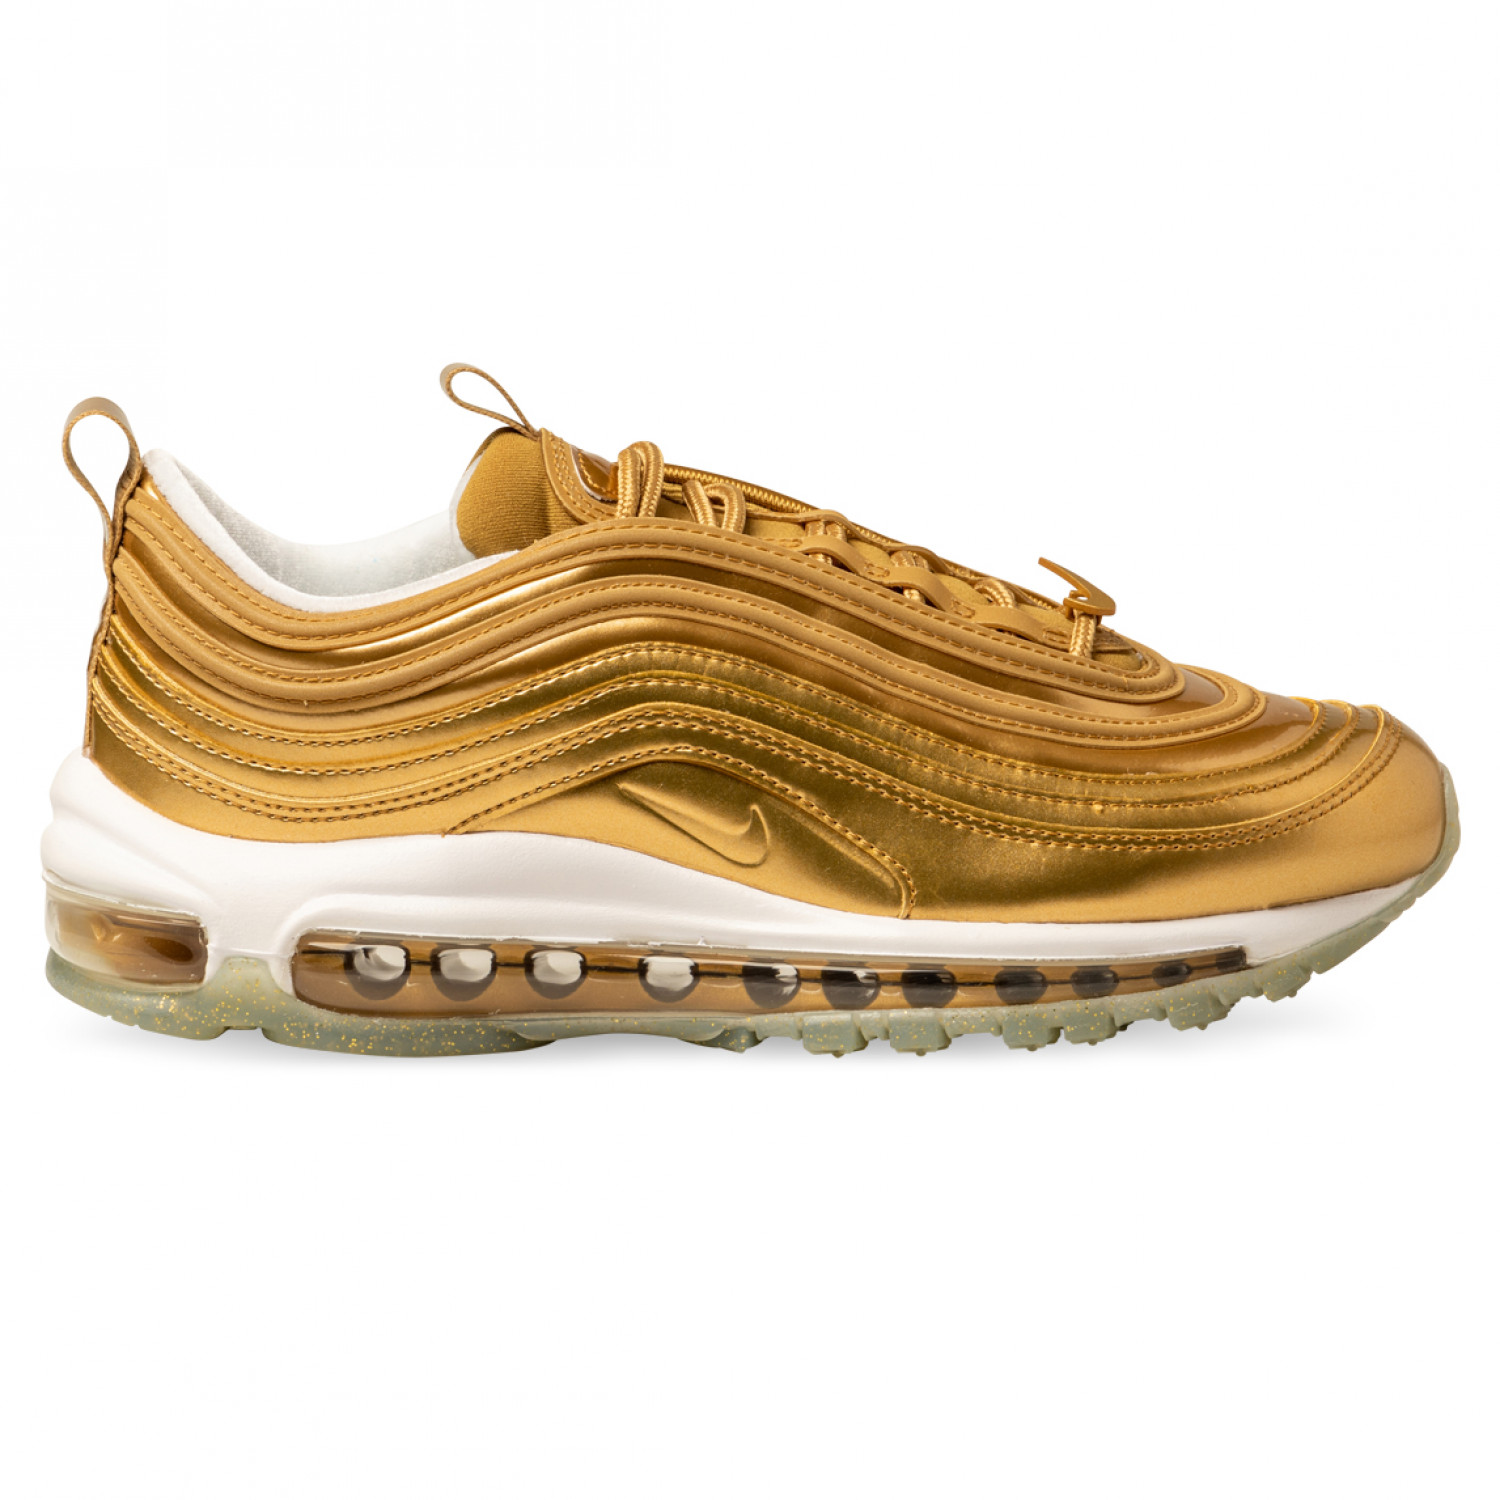 Now Available: Nike Air Max 97 LX (W 